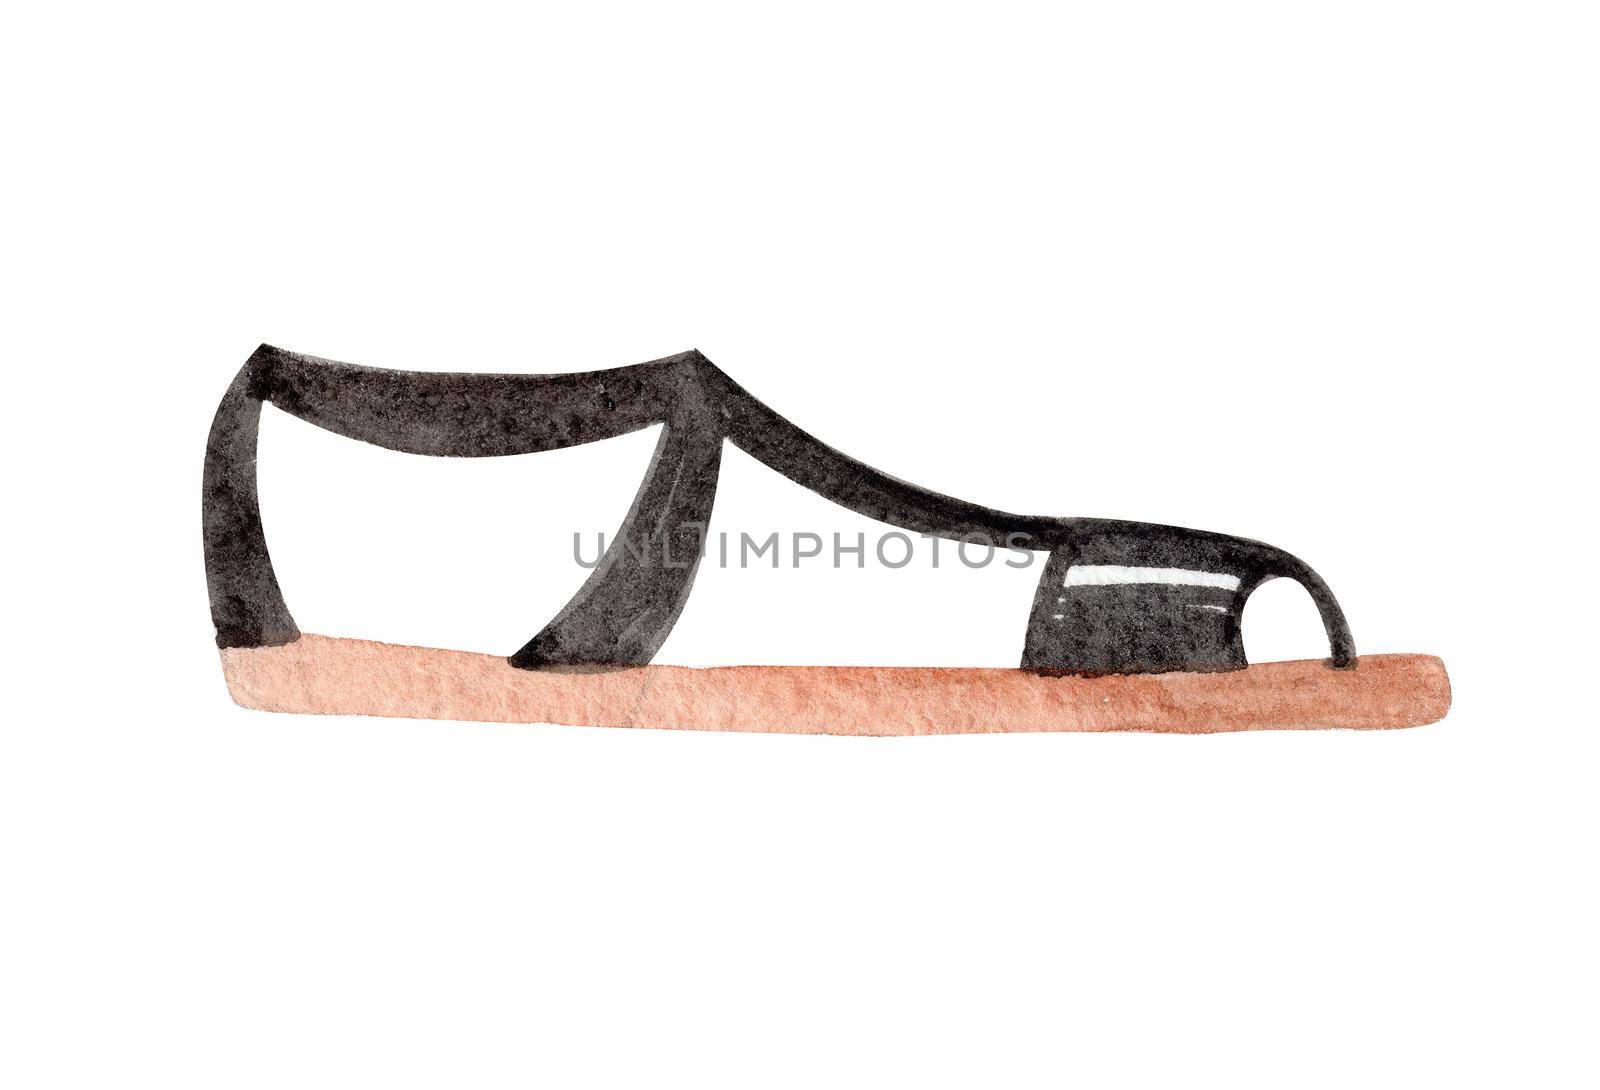 watercolor black women shoes side view isolated on white background. Summer foot wear illustration